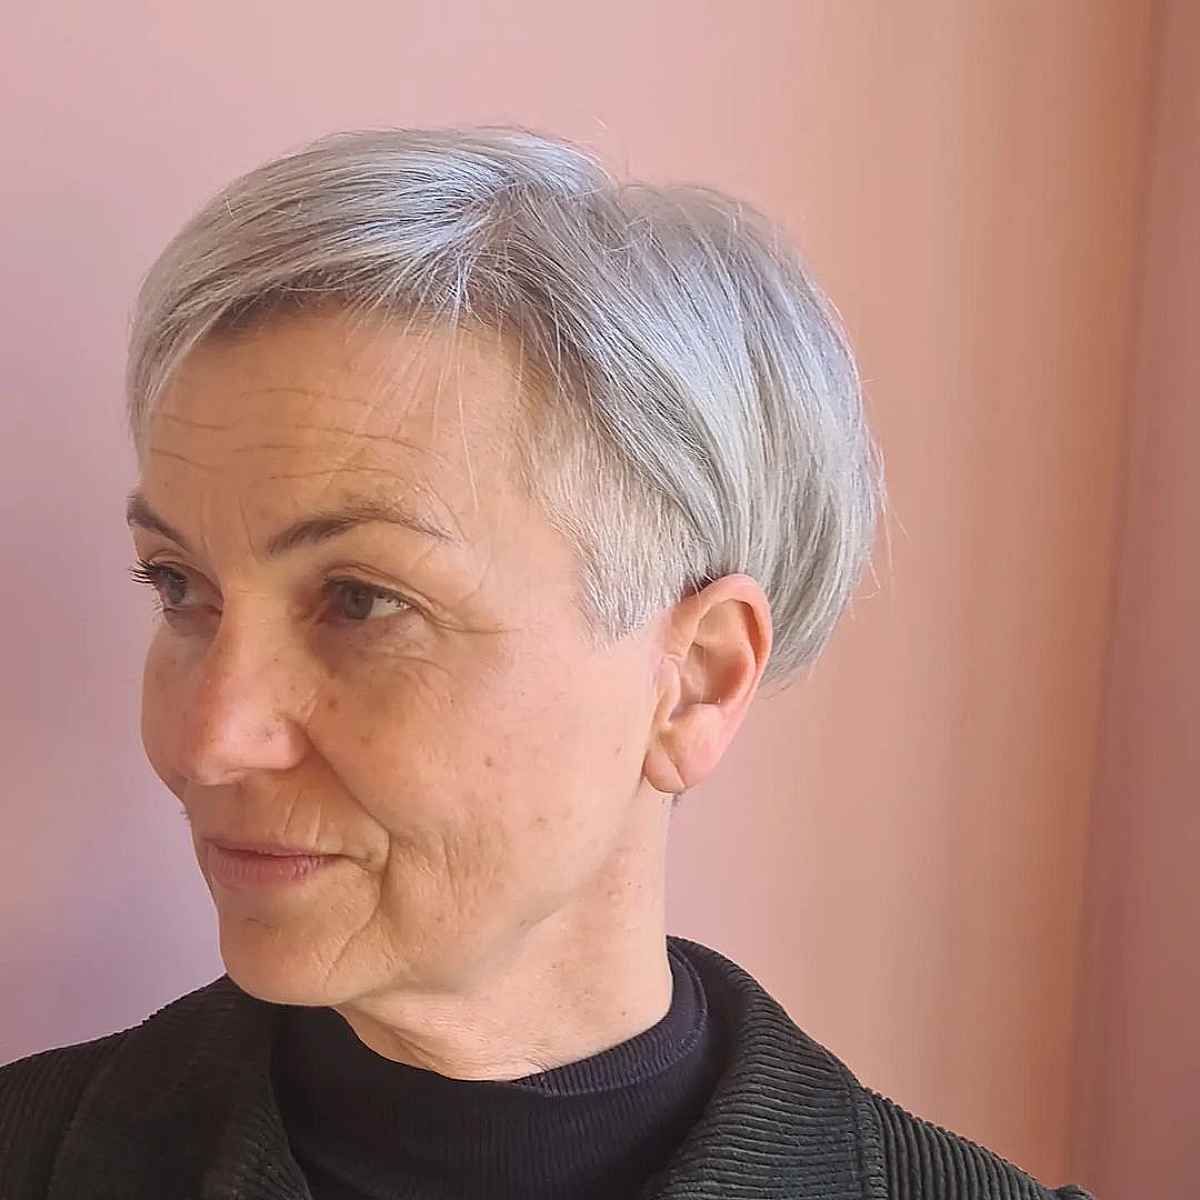 Shaved side on pixie hair for women in the 60s